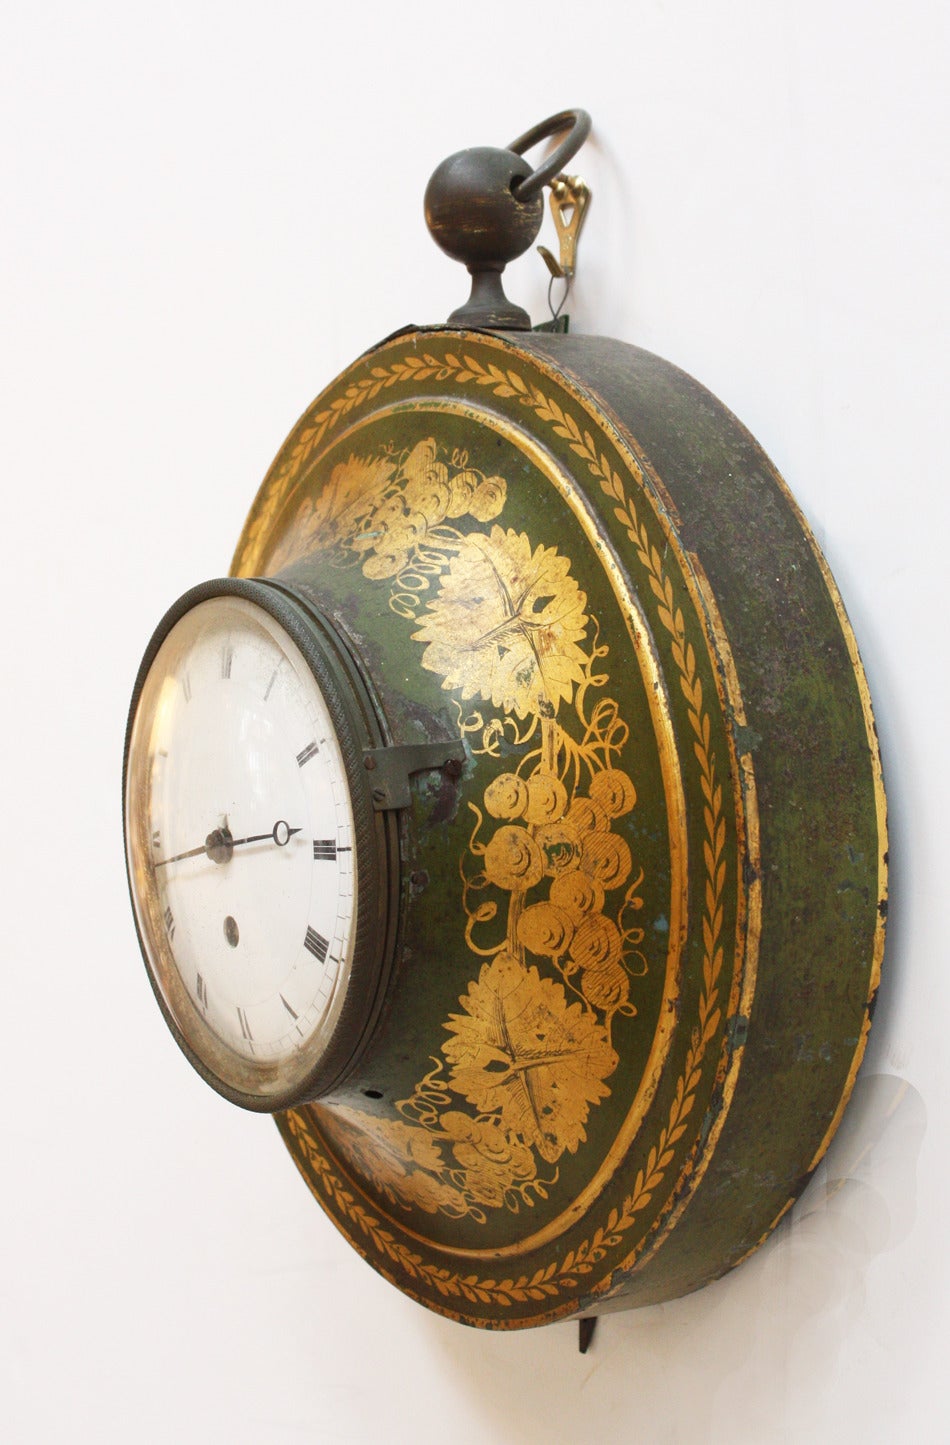 A round hanging tole clock, gold on black with green background.  England.  Late 19th Century.